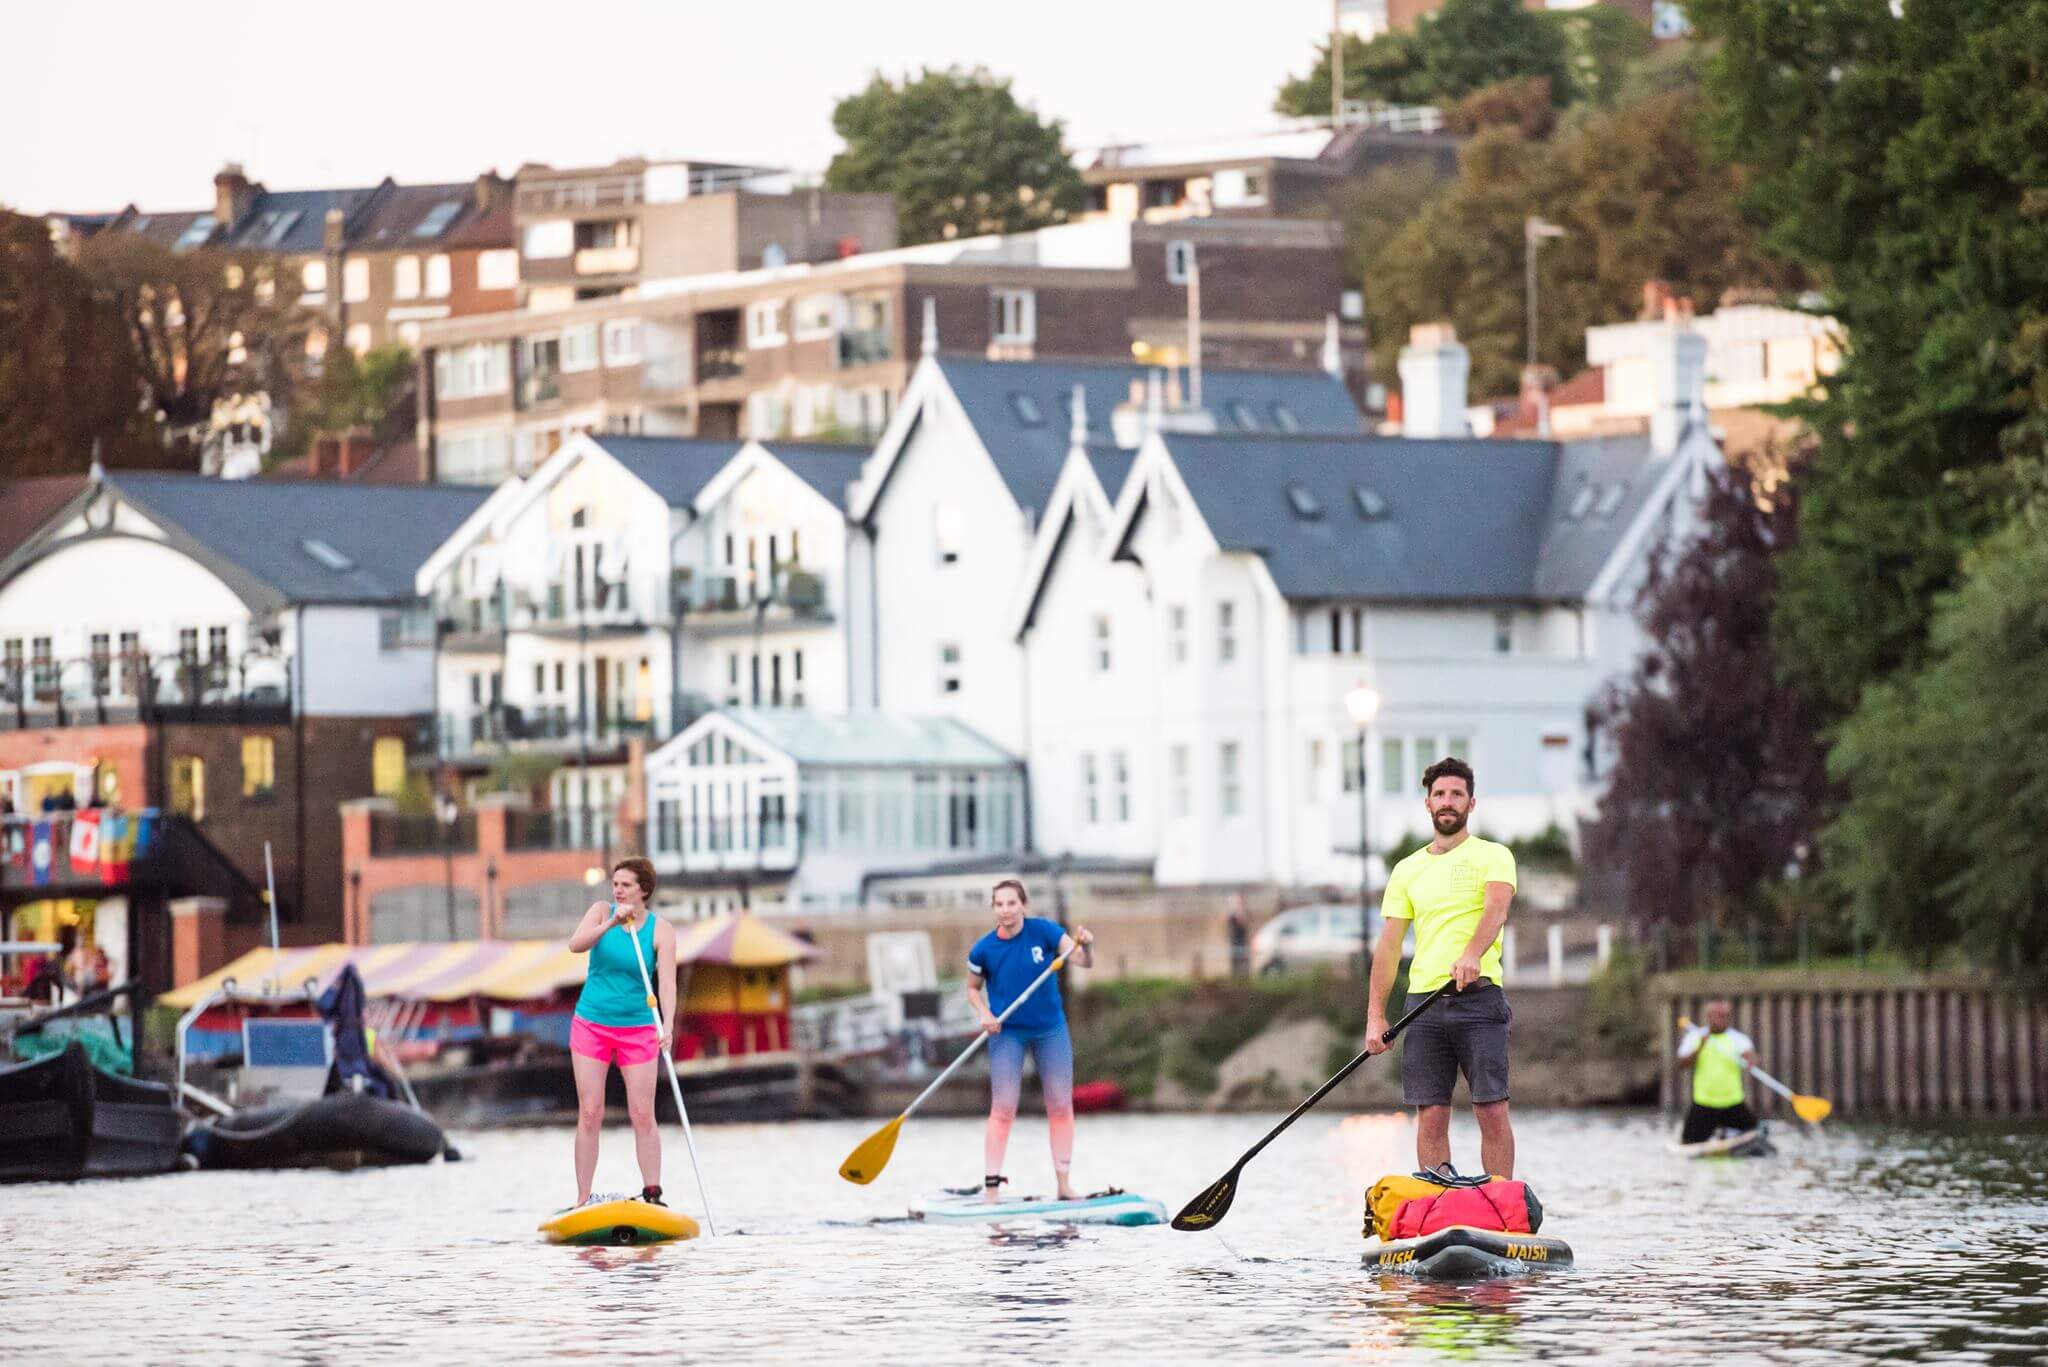 Paddleboarding on the River Thames, England 